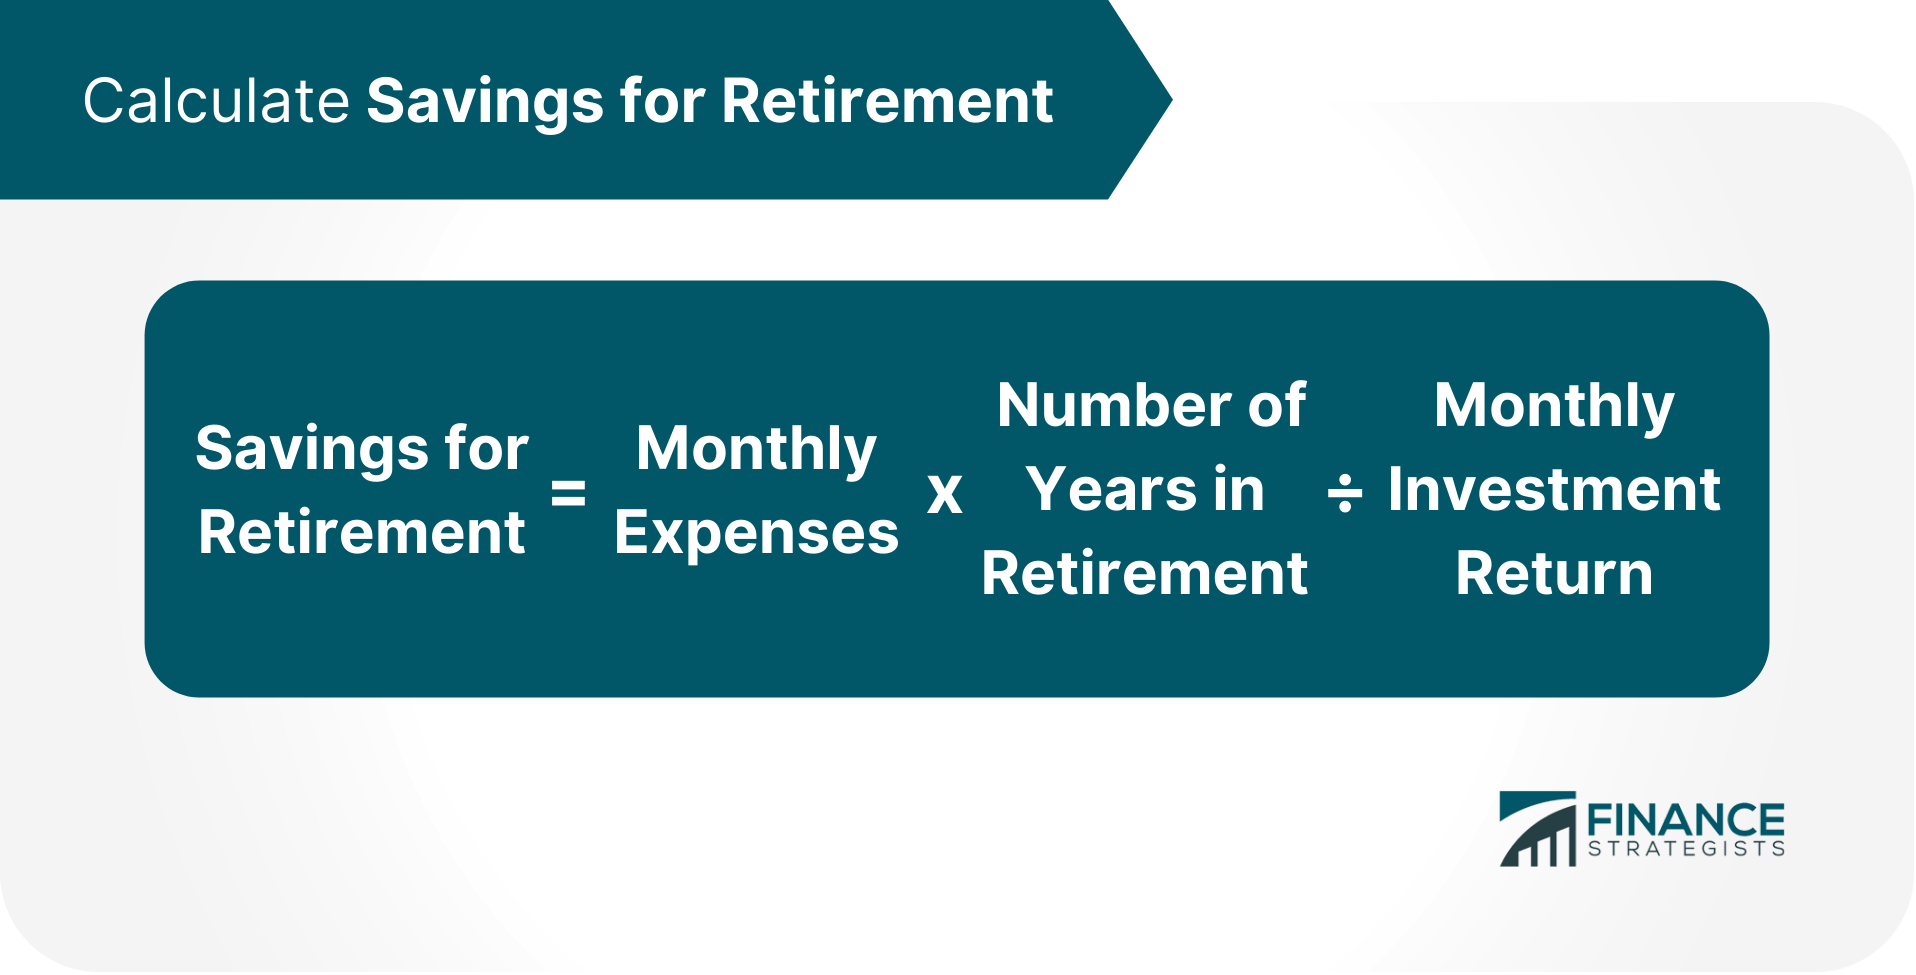 Calculate_Savings_for_Retirement